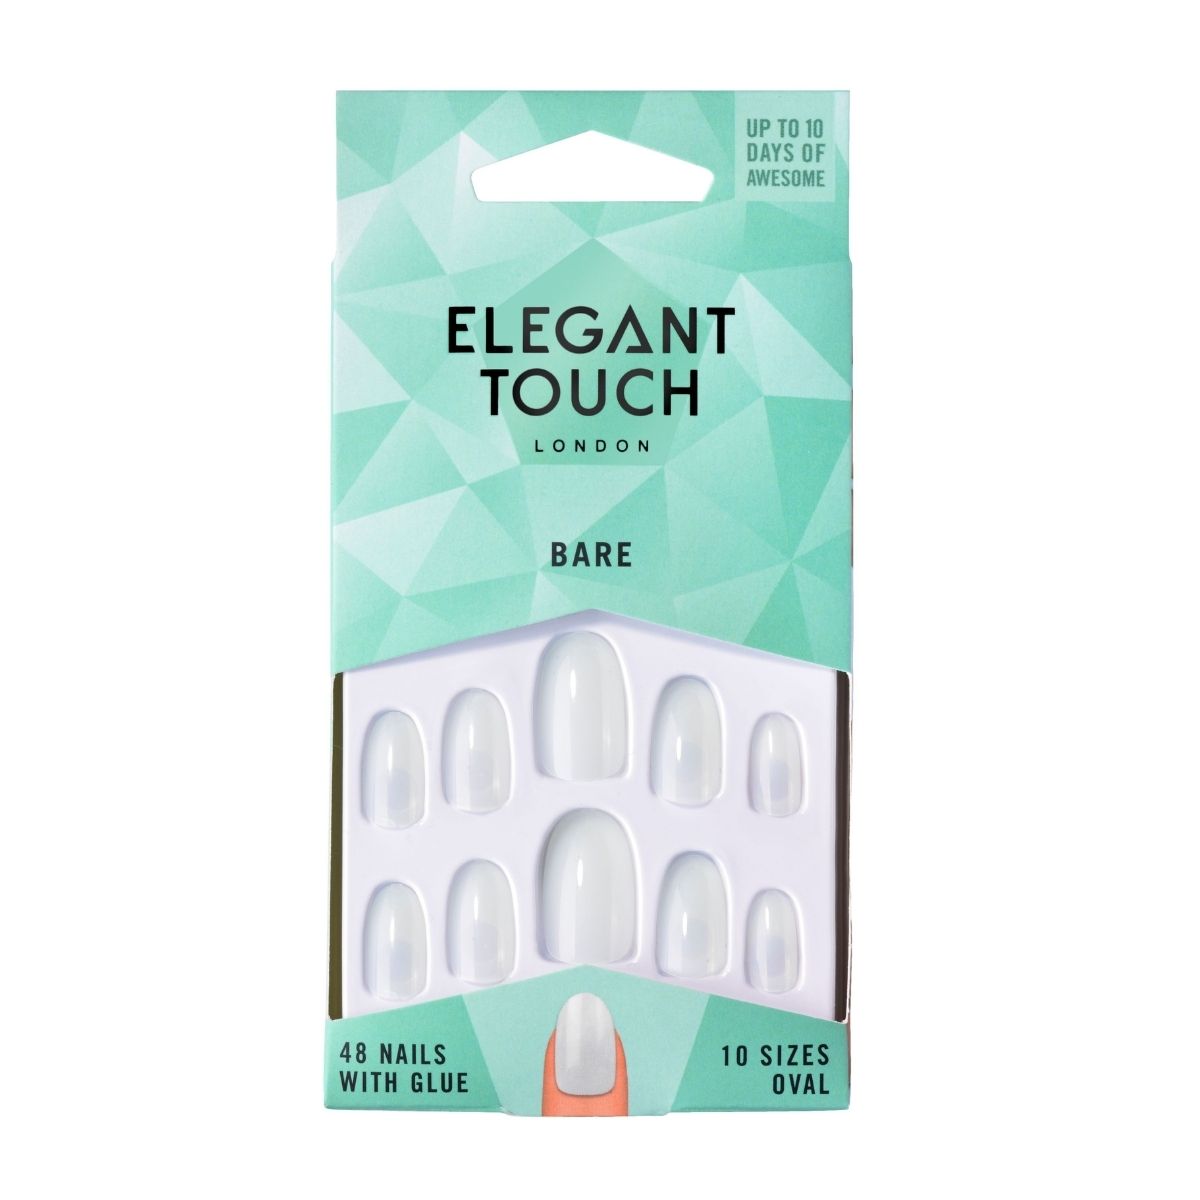 Elegant Touch Bare Nails Oval.